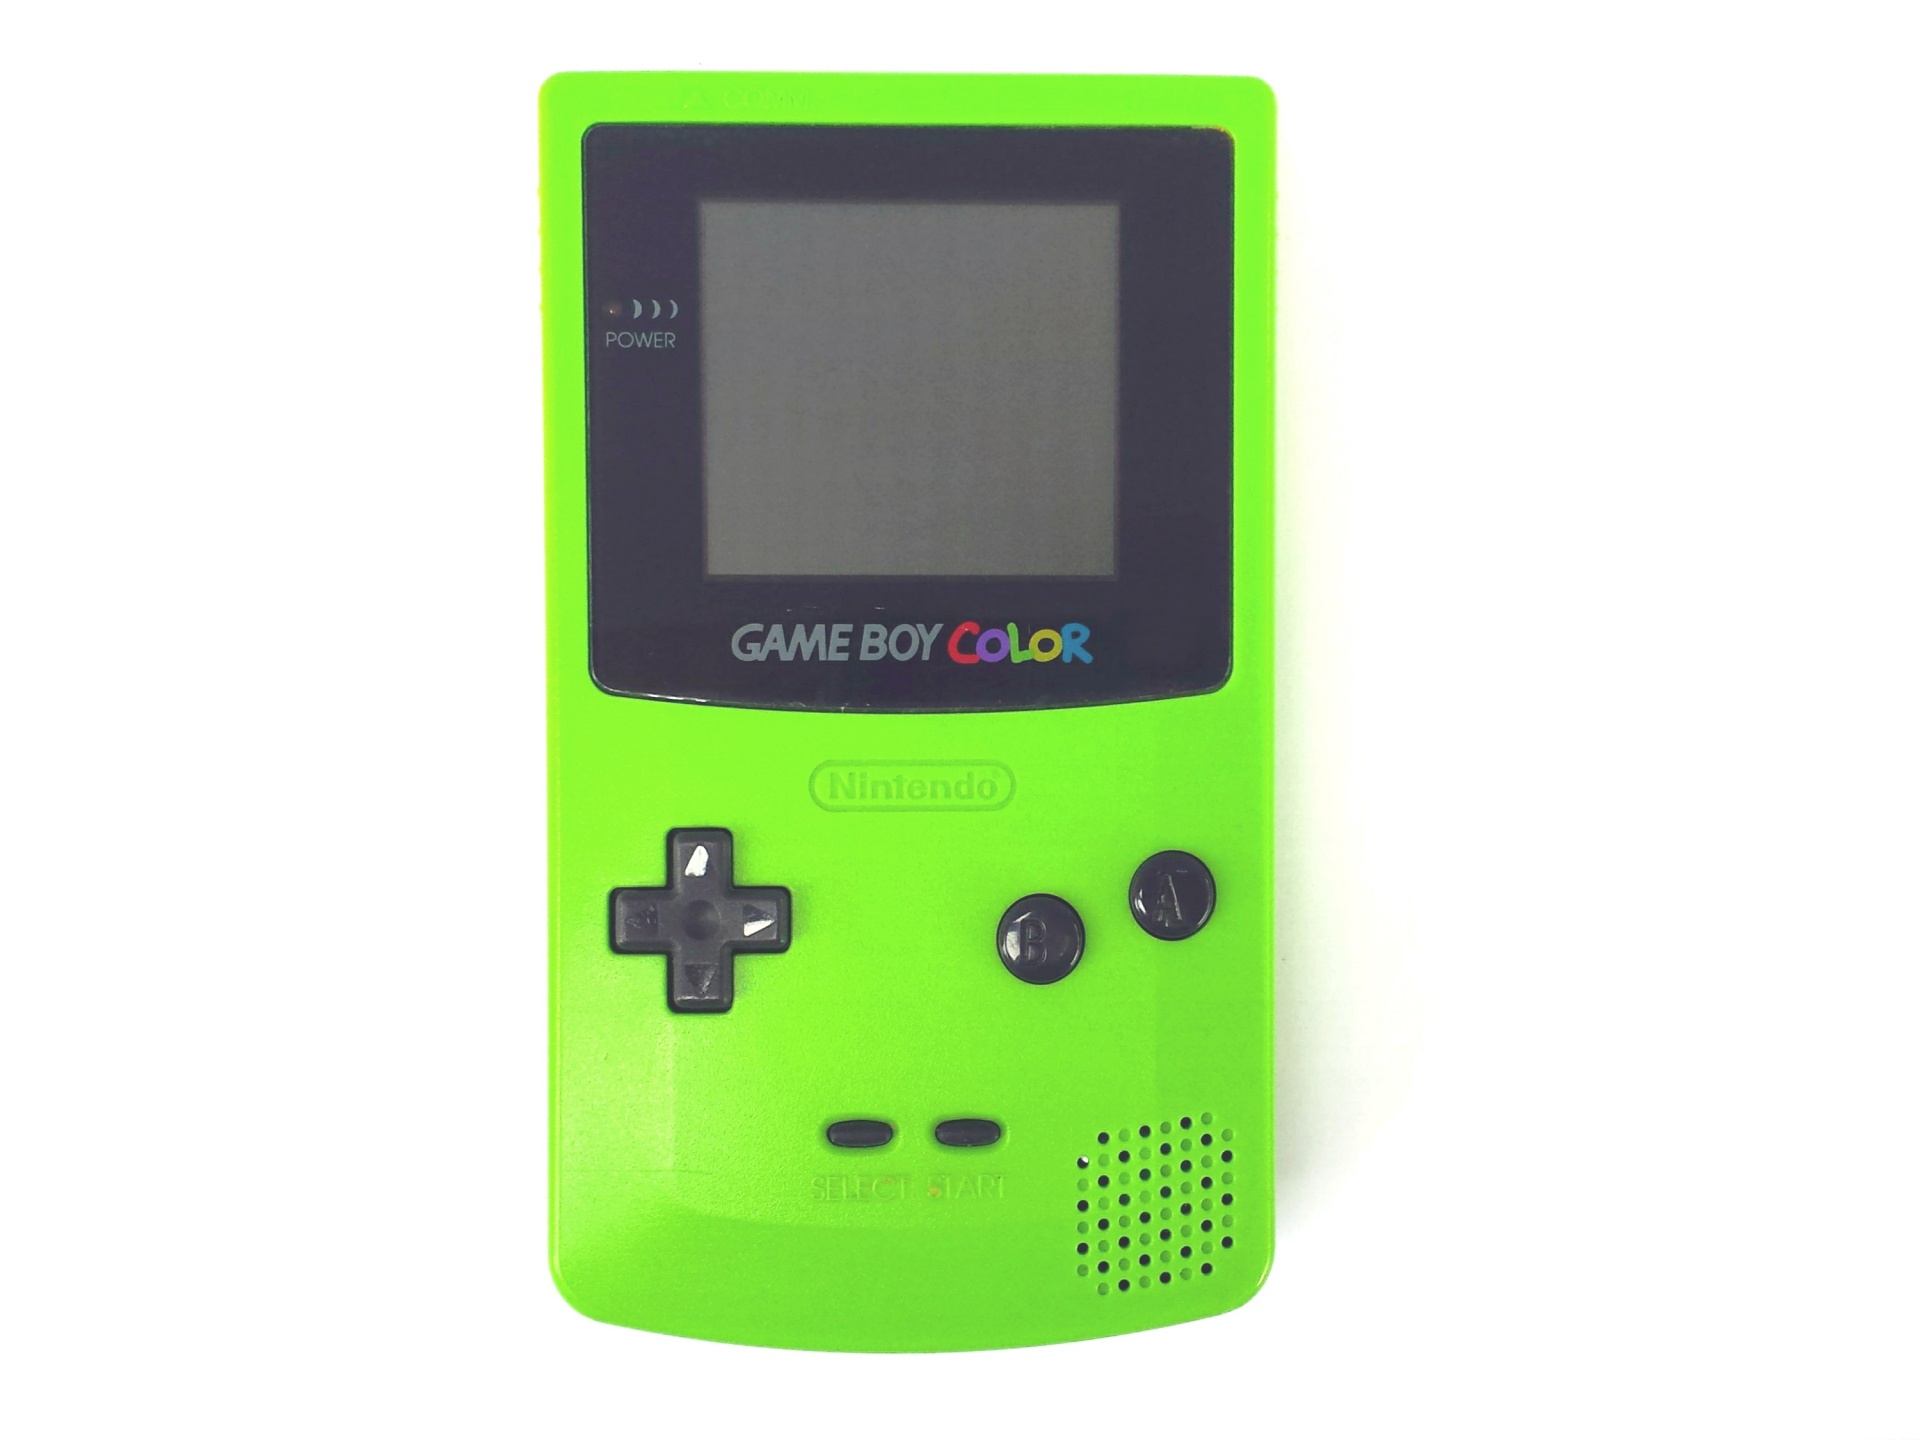 Green Nintendo Game boy Color against a white background